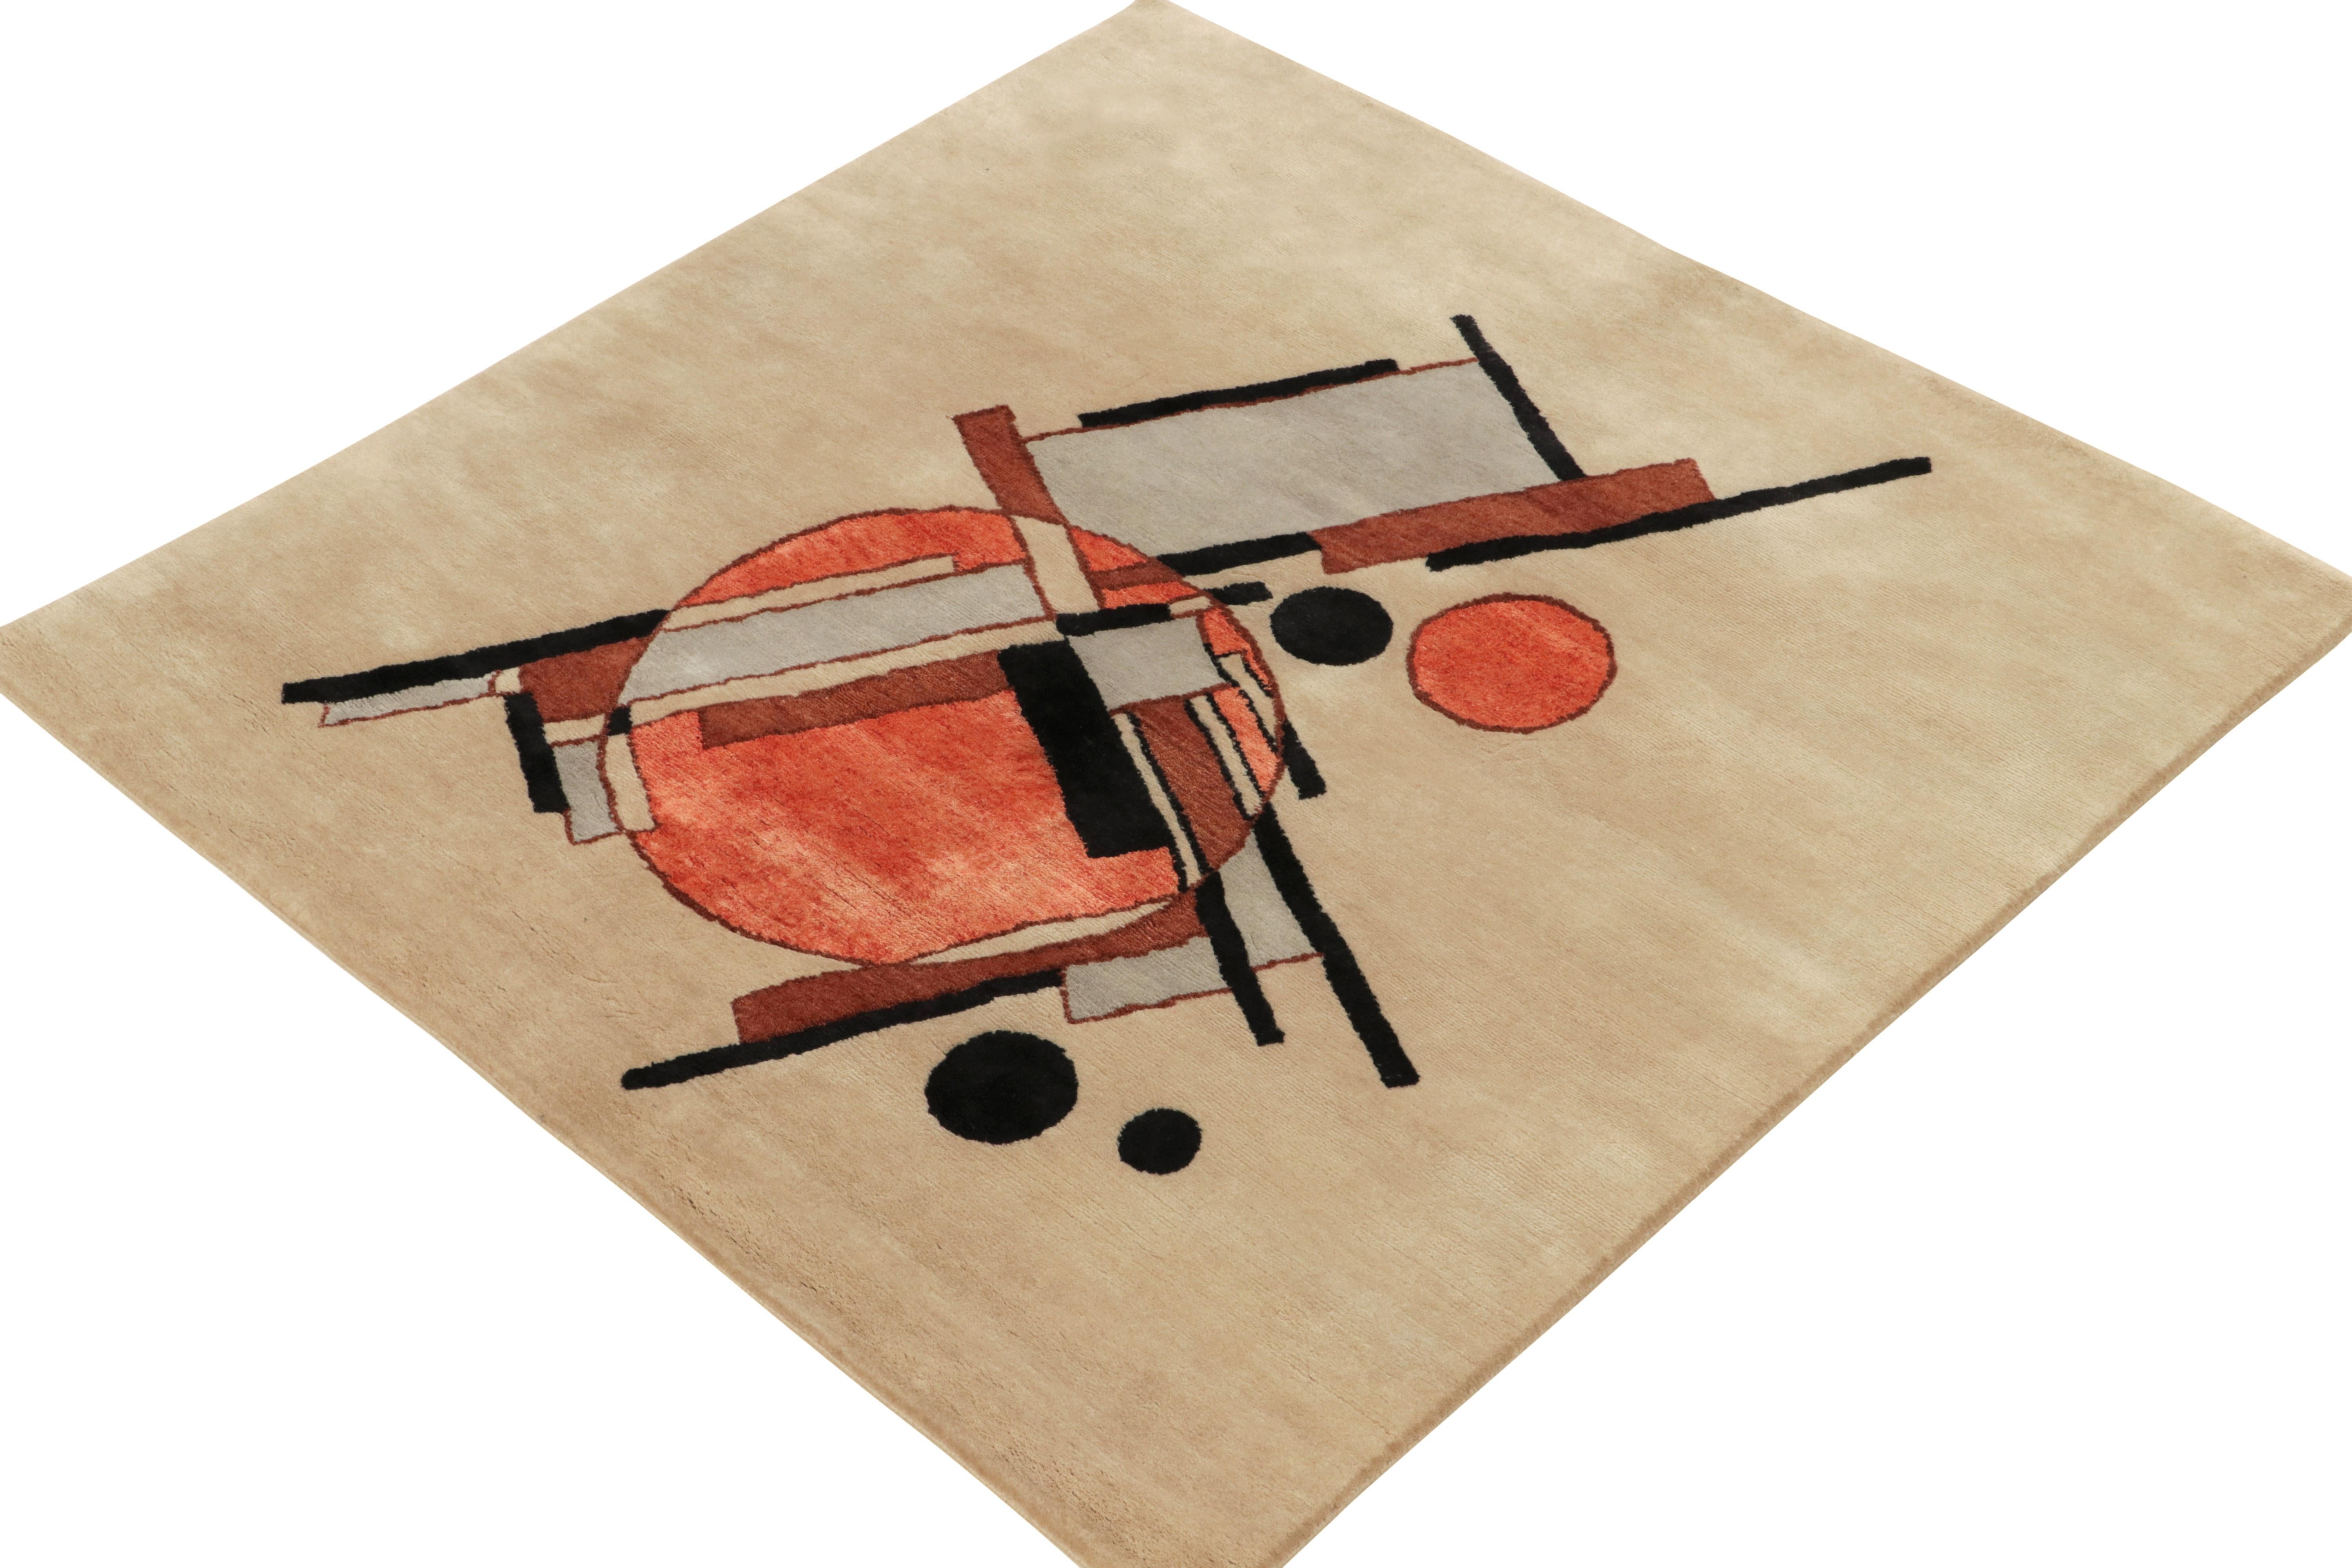 A 5x5 contemporary piece from Rug & Kilim’s Deco Collection, inspired by the works of Kazimir Malevich in his bold suprematism style. The rug experiments with superimposition in high art given reverence in our new medium through exploring depth with